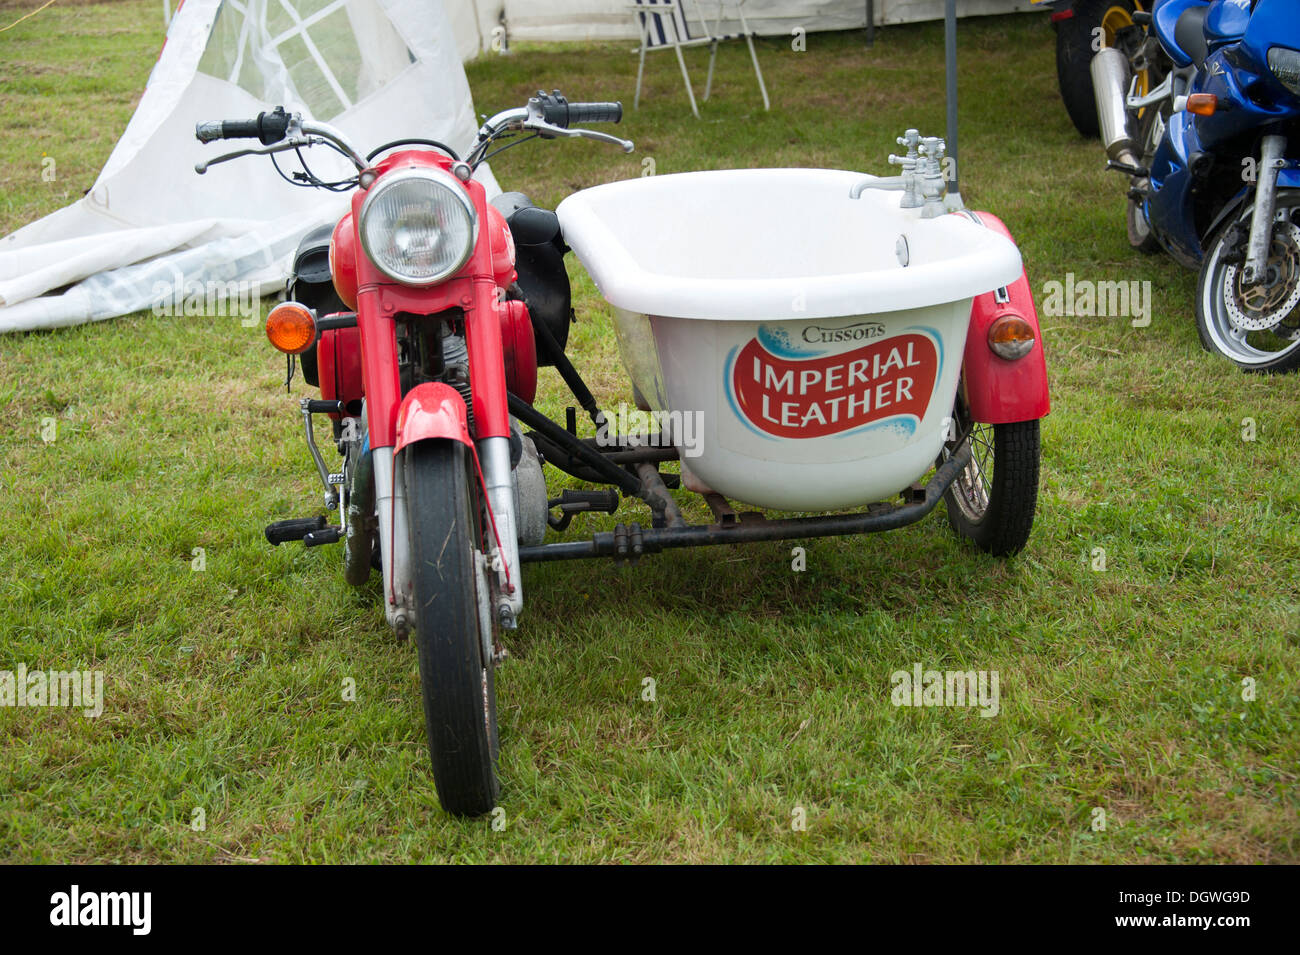 Imperial Leather Motorbike and sidecar bath tub Stock Photo